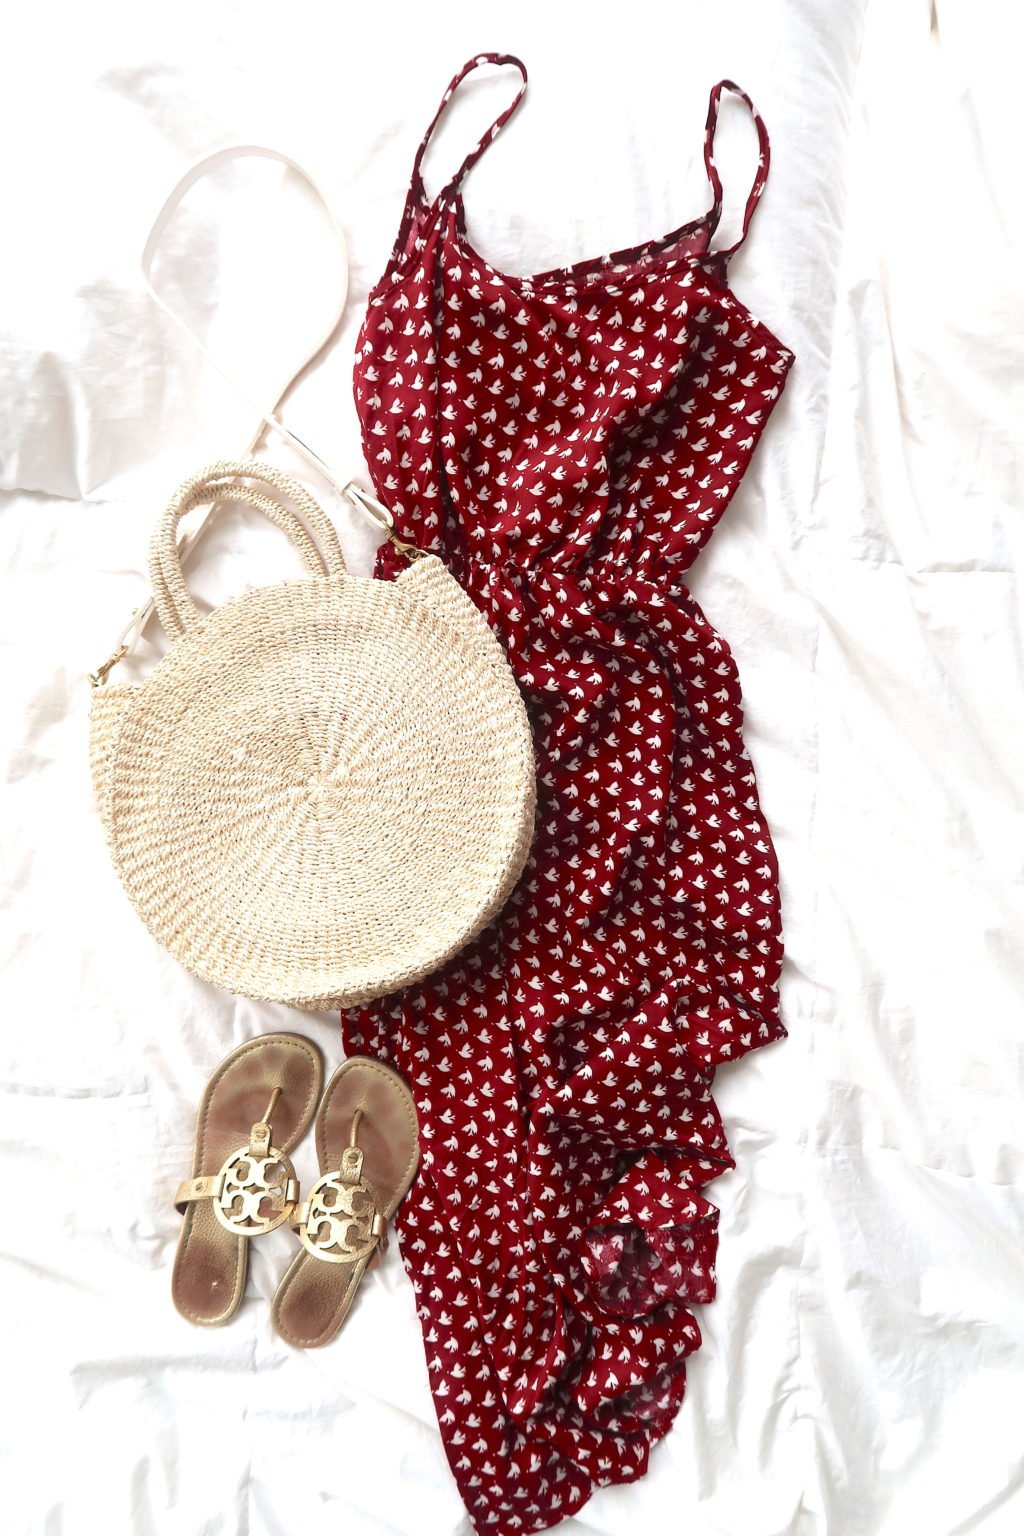 What's In My Suitcase: Beach Vacation, maxi dress, sandals, and tote